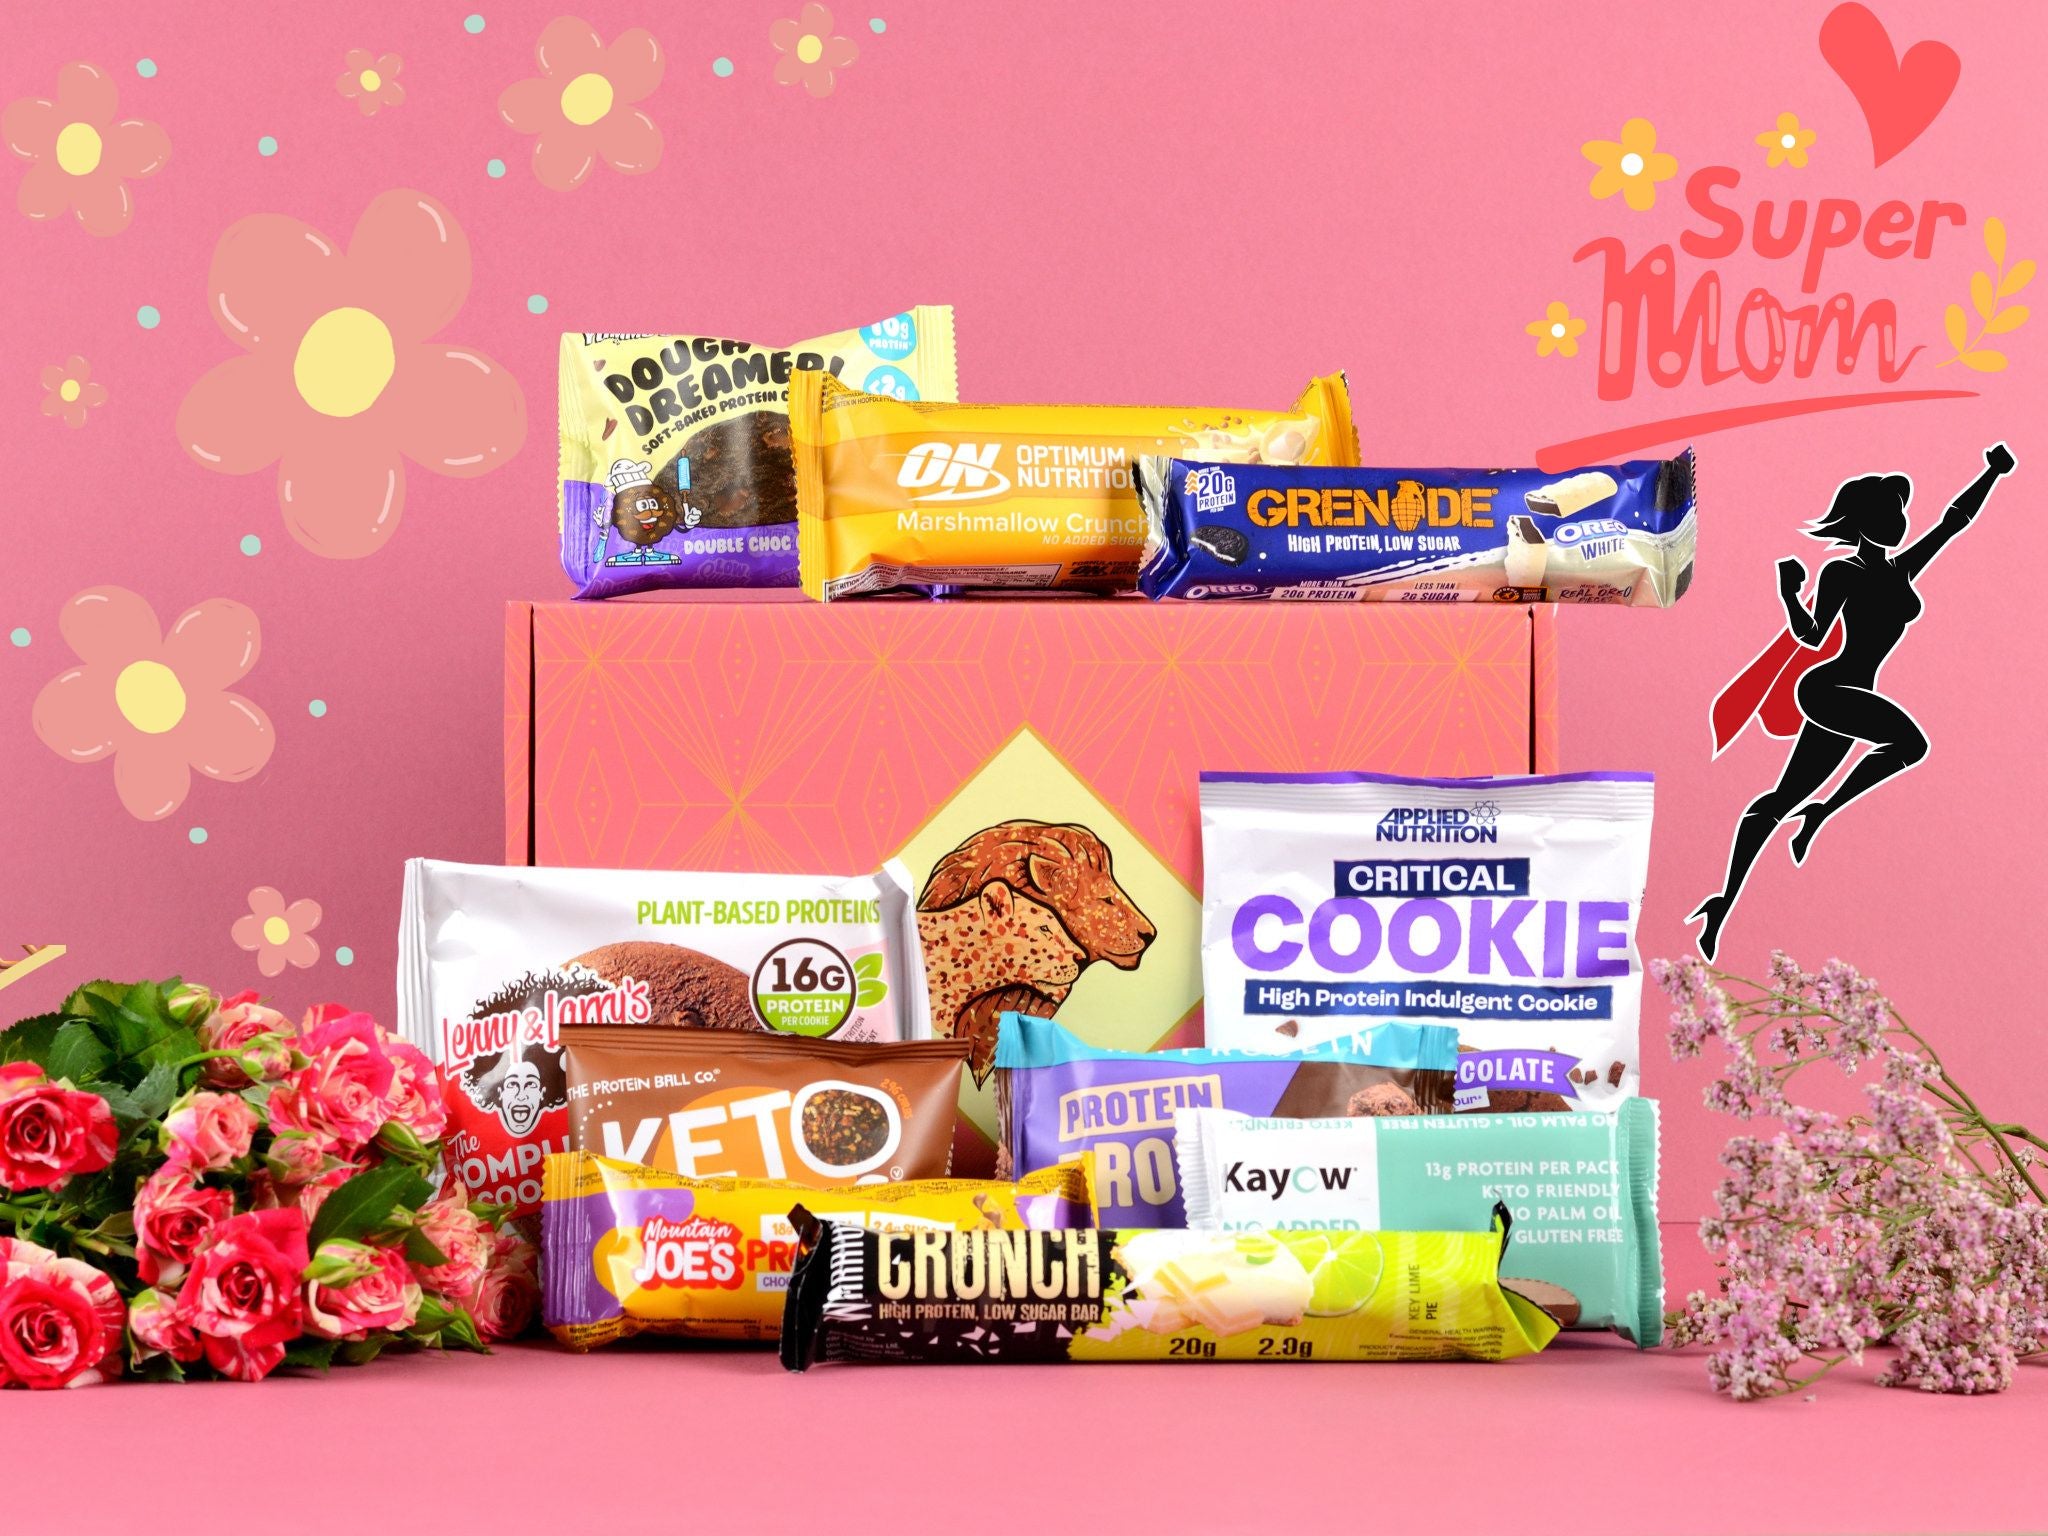 Box Of Protein | Protein Mothers Day Gift Box | Mothers Day Flowers Roses | Protein Snacks Hamper | Kayow, Lenny & Larrys, MyProtein Brownie, Grenade, Mountain Joes, Yummios, Keto Keto, Protein Ball Co., Optimum Nutrition, Warrior Crunch, Applied Nutrition